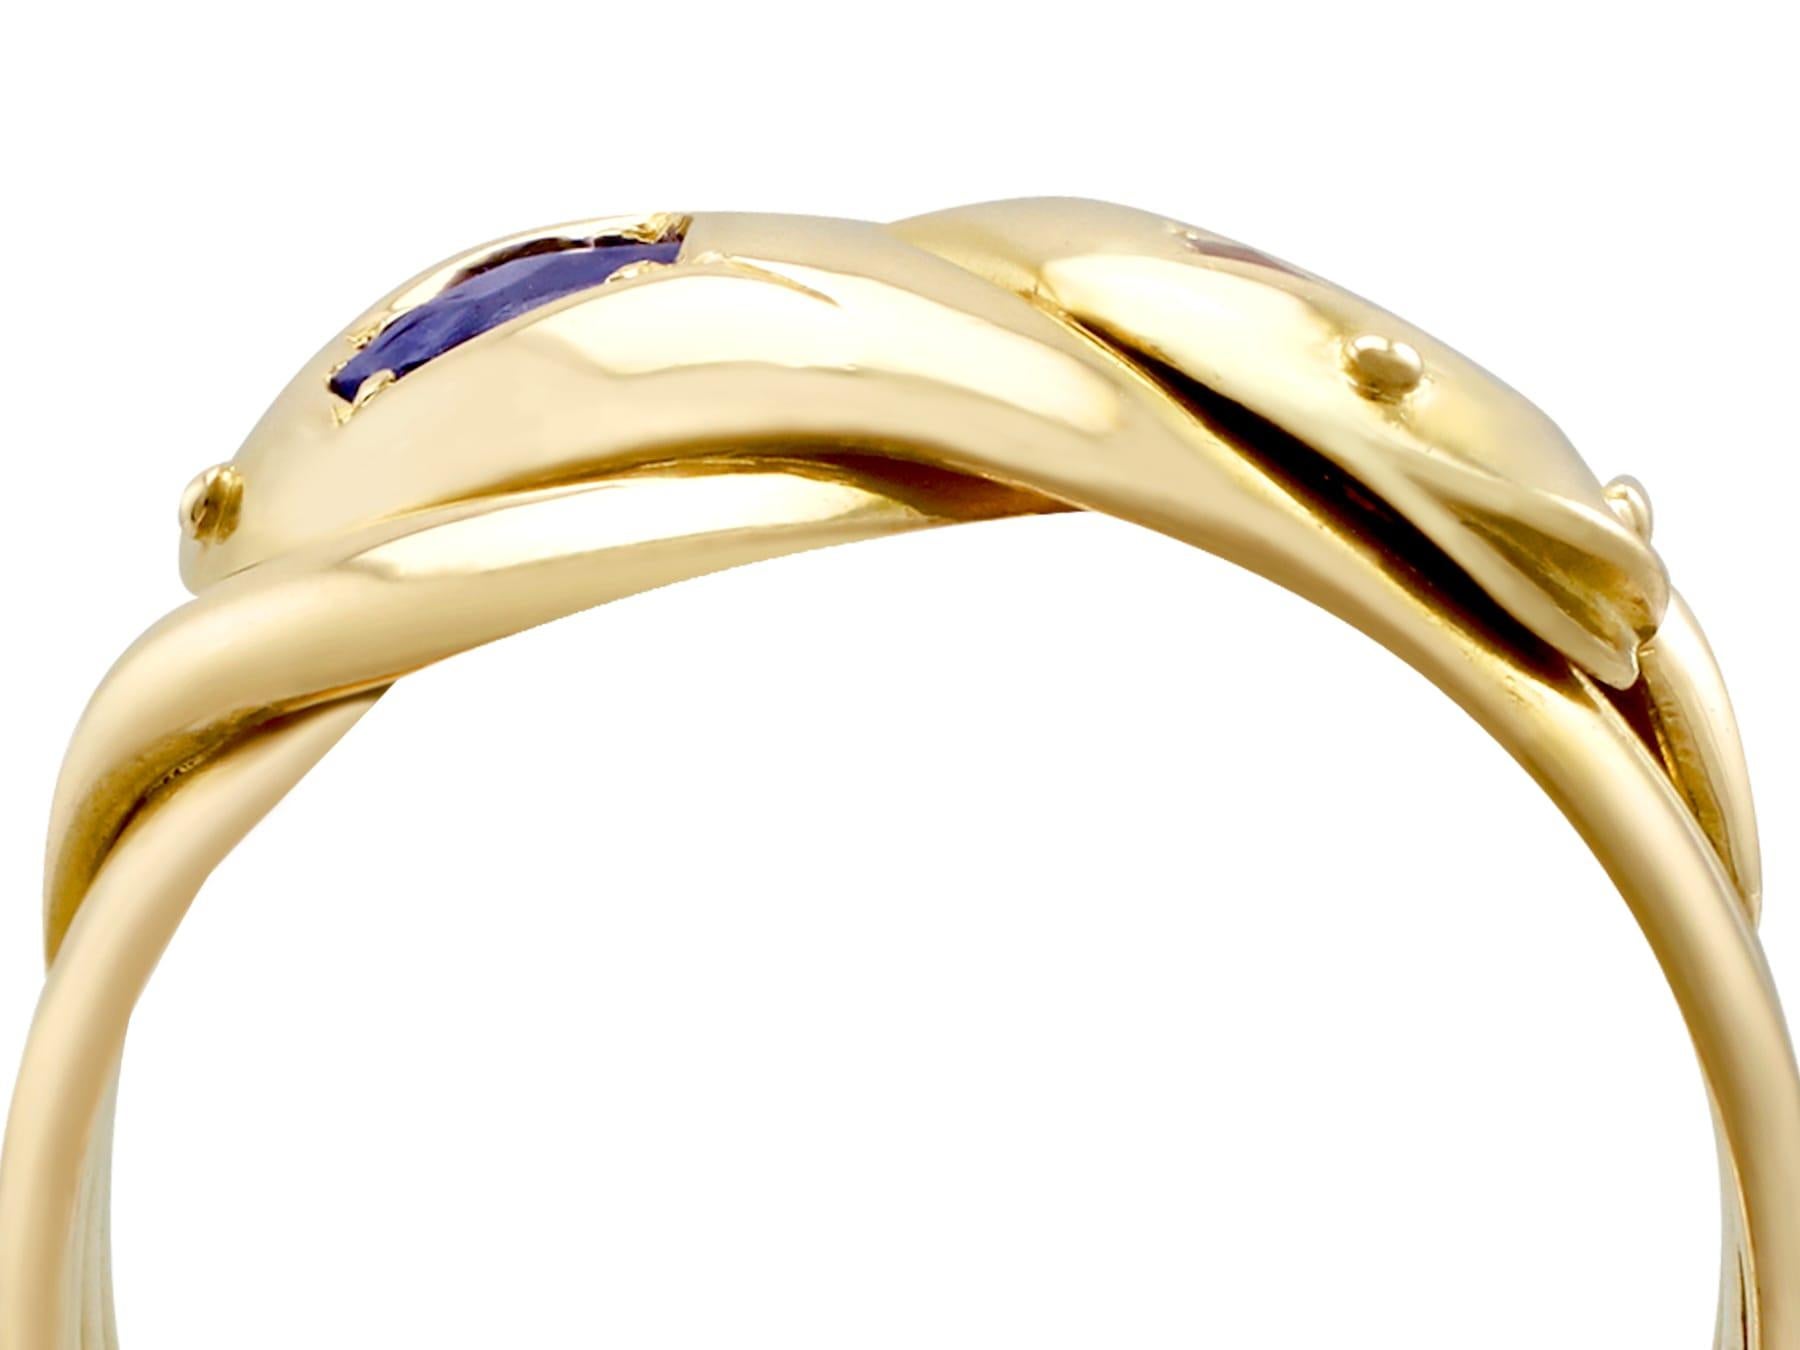 A fine and impressive vintage, 18 karat yellow gold snake ring; part of our diverse vintage jewelry and estate jewelry collections.

This exceptional vintage snake ring has been crafted in 18k yellow gold.

The ring has a substantial, multi-strand